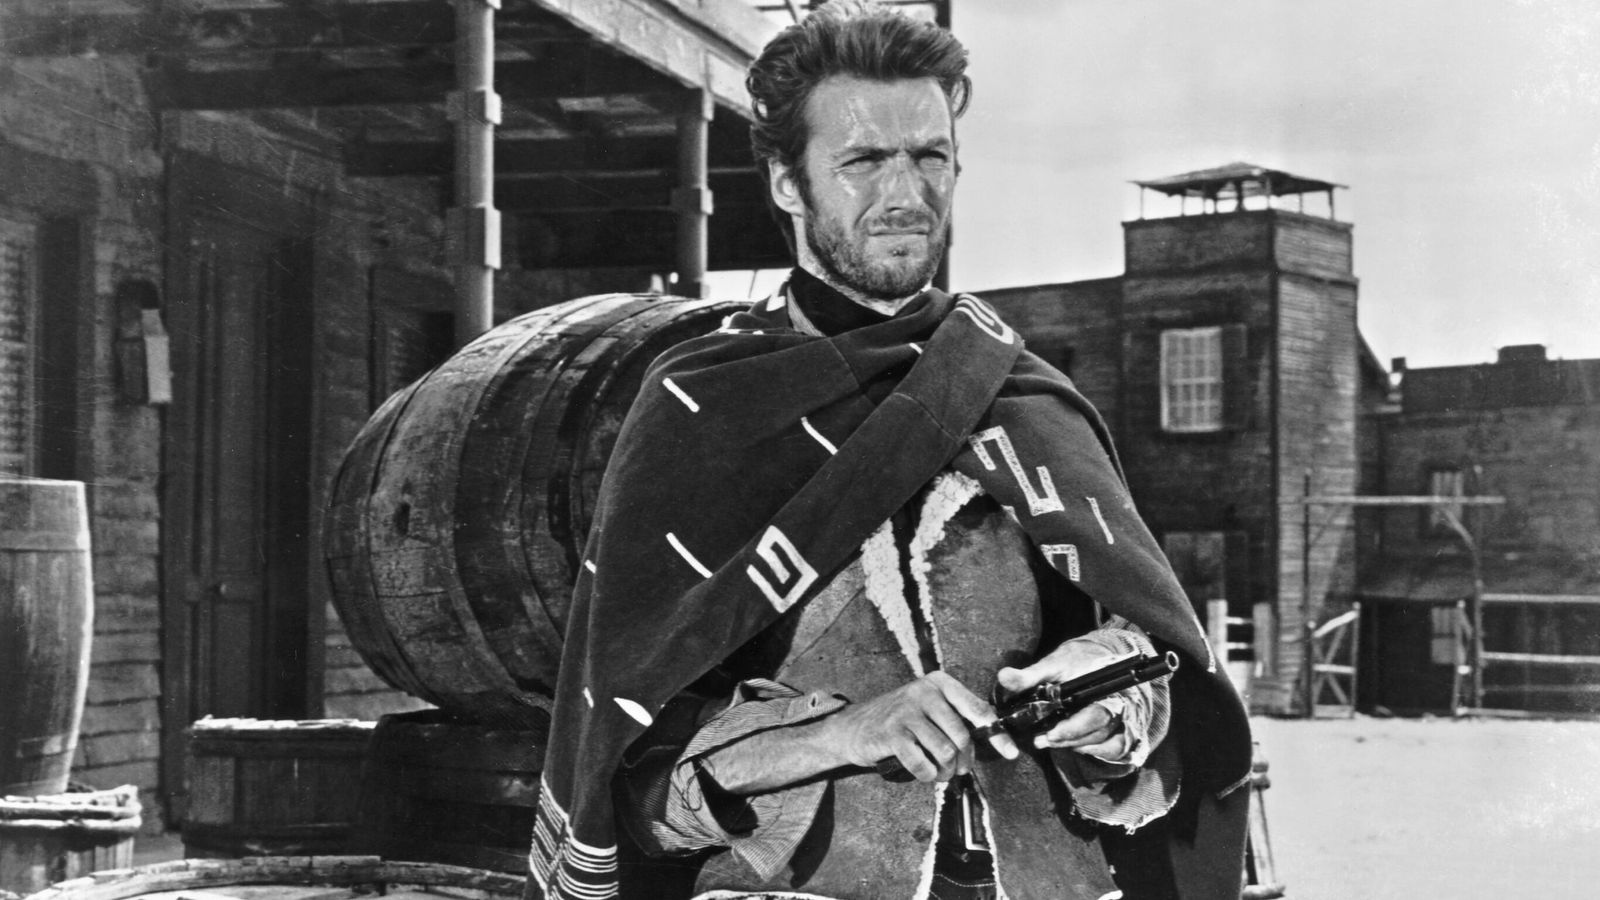 Clint Eastwood classic A Fistful Of Dollars set to be remade | Ents & Arts News